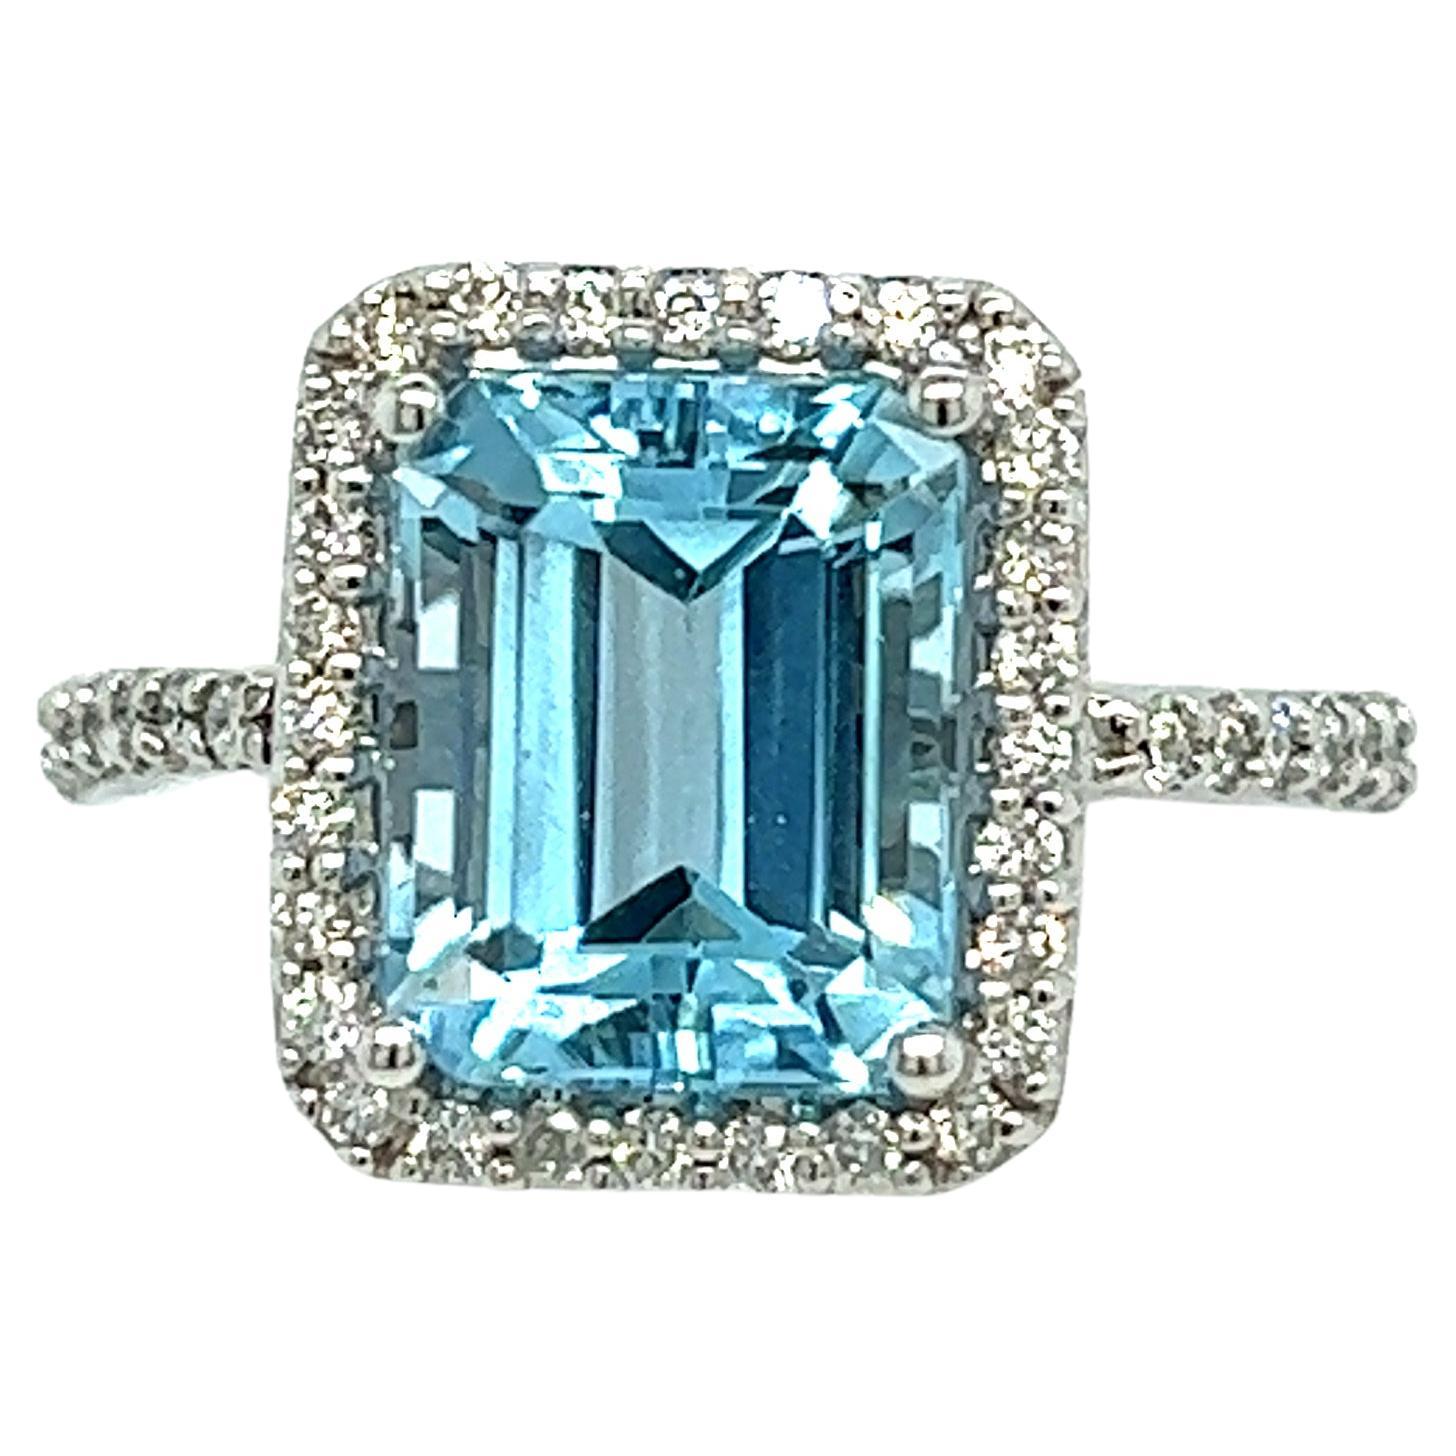 Natural Topaz Diamond Ring 6.5 14k W Gold 5.1 TCW Certified For Sale